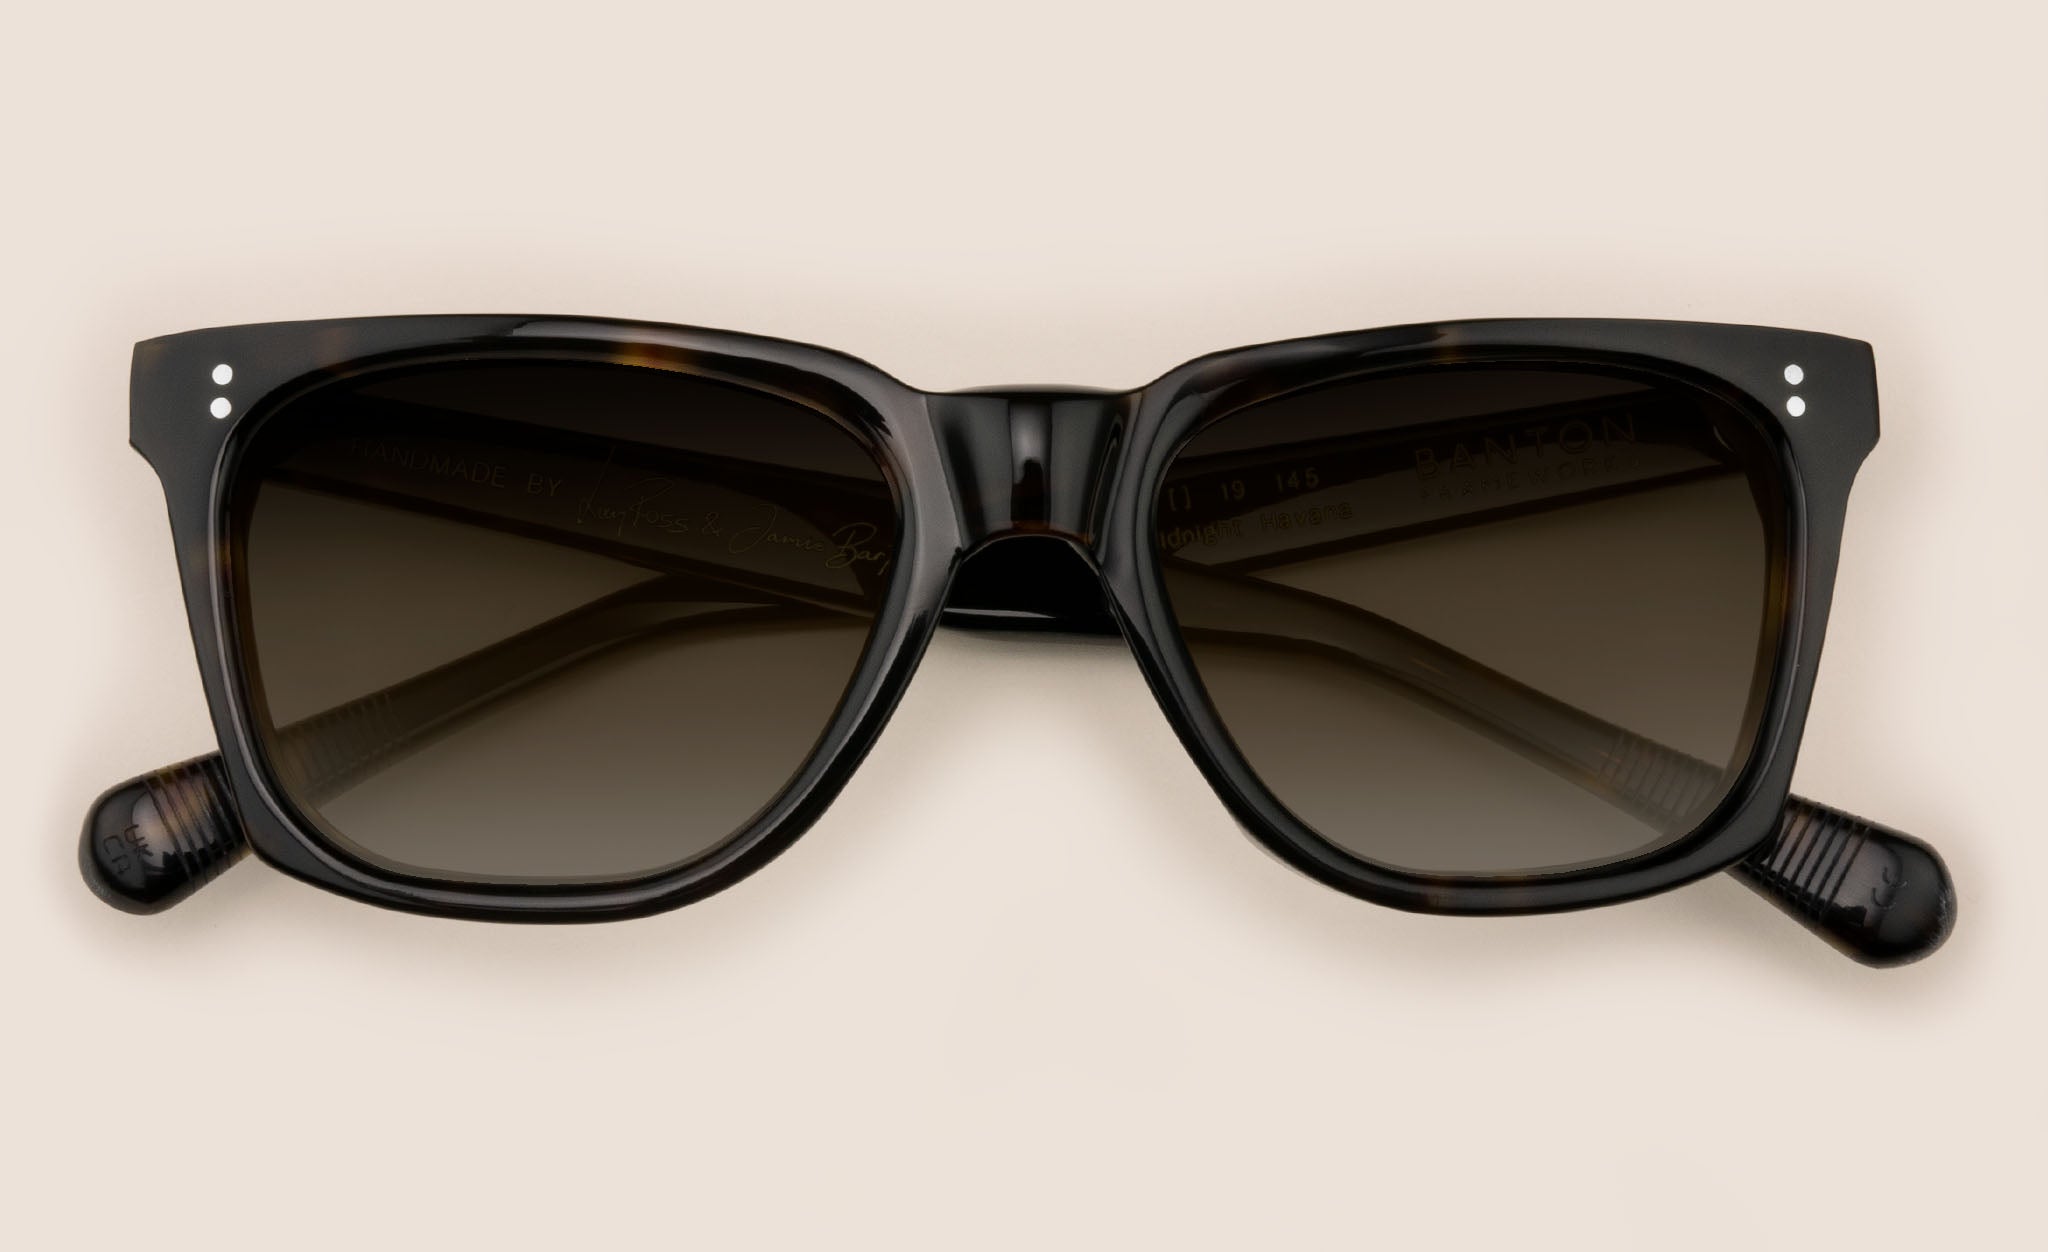 19 best Dad sunglasses gifts